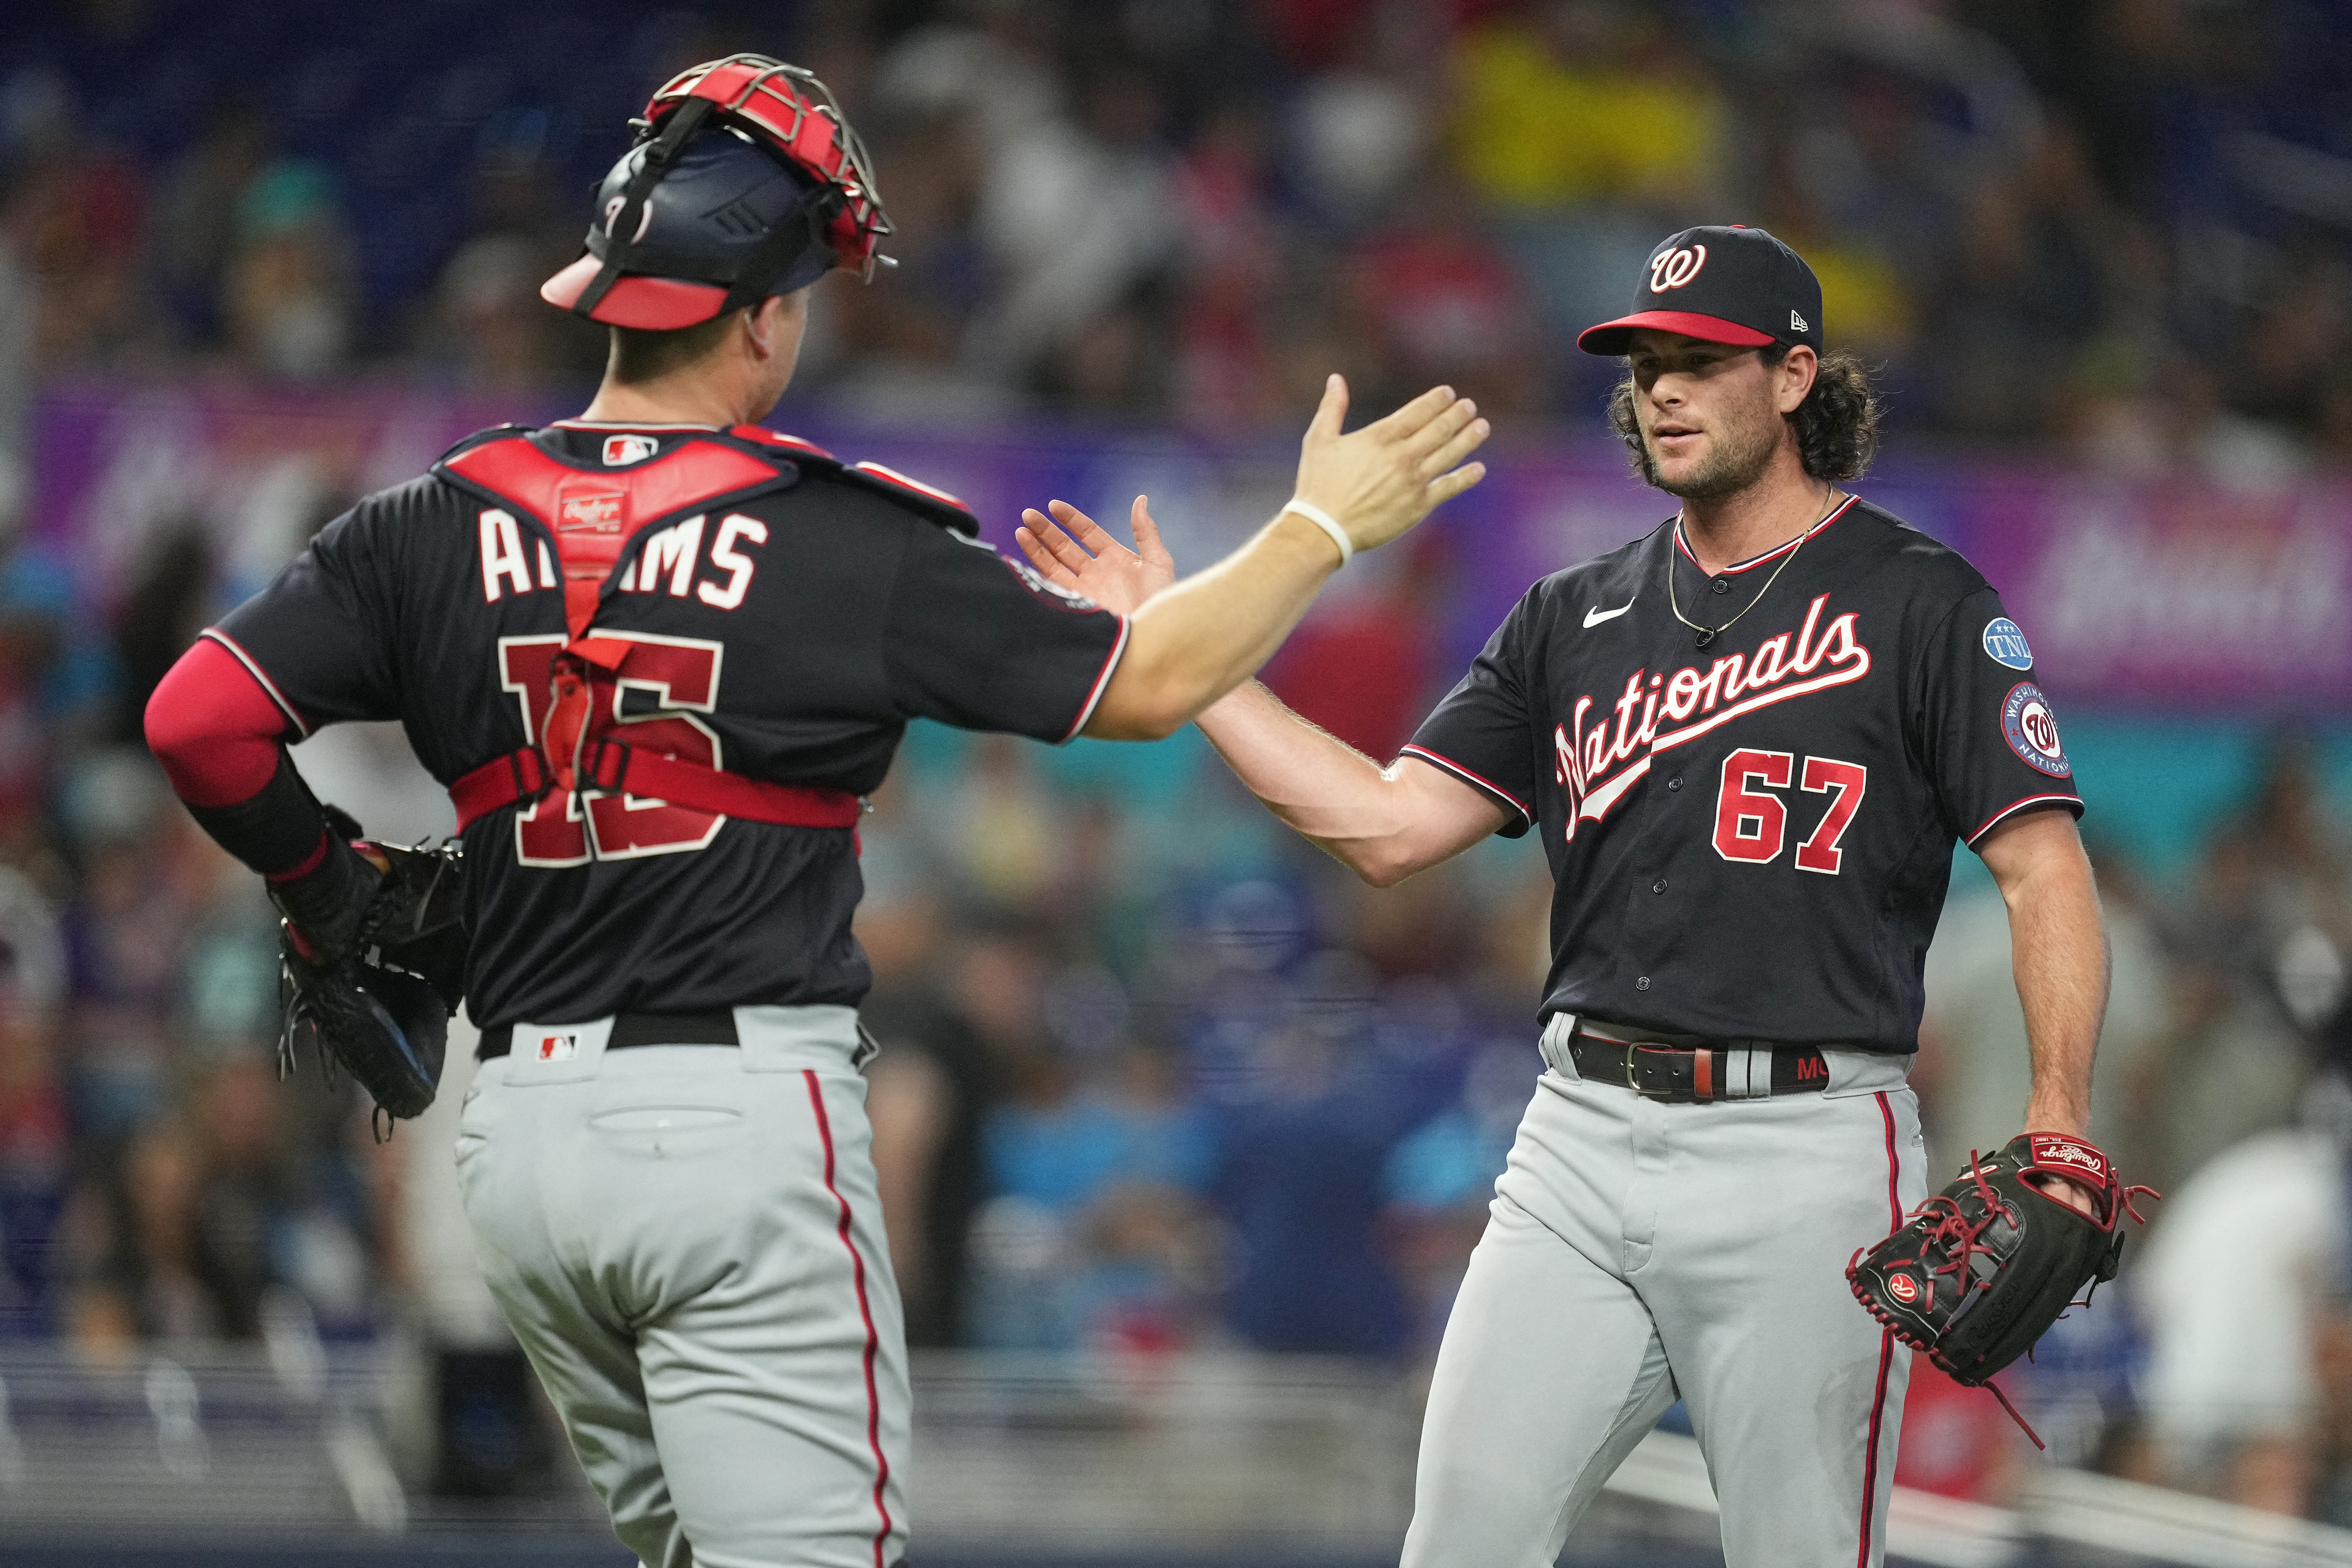 Nationals score go-ahead run in 9th on passed ball, rally to beat Marlins  3-2 - ABC News